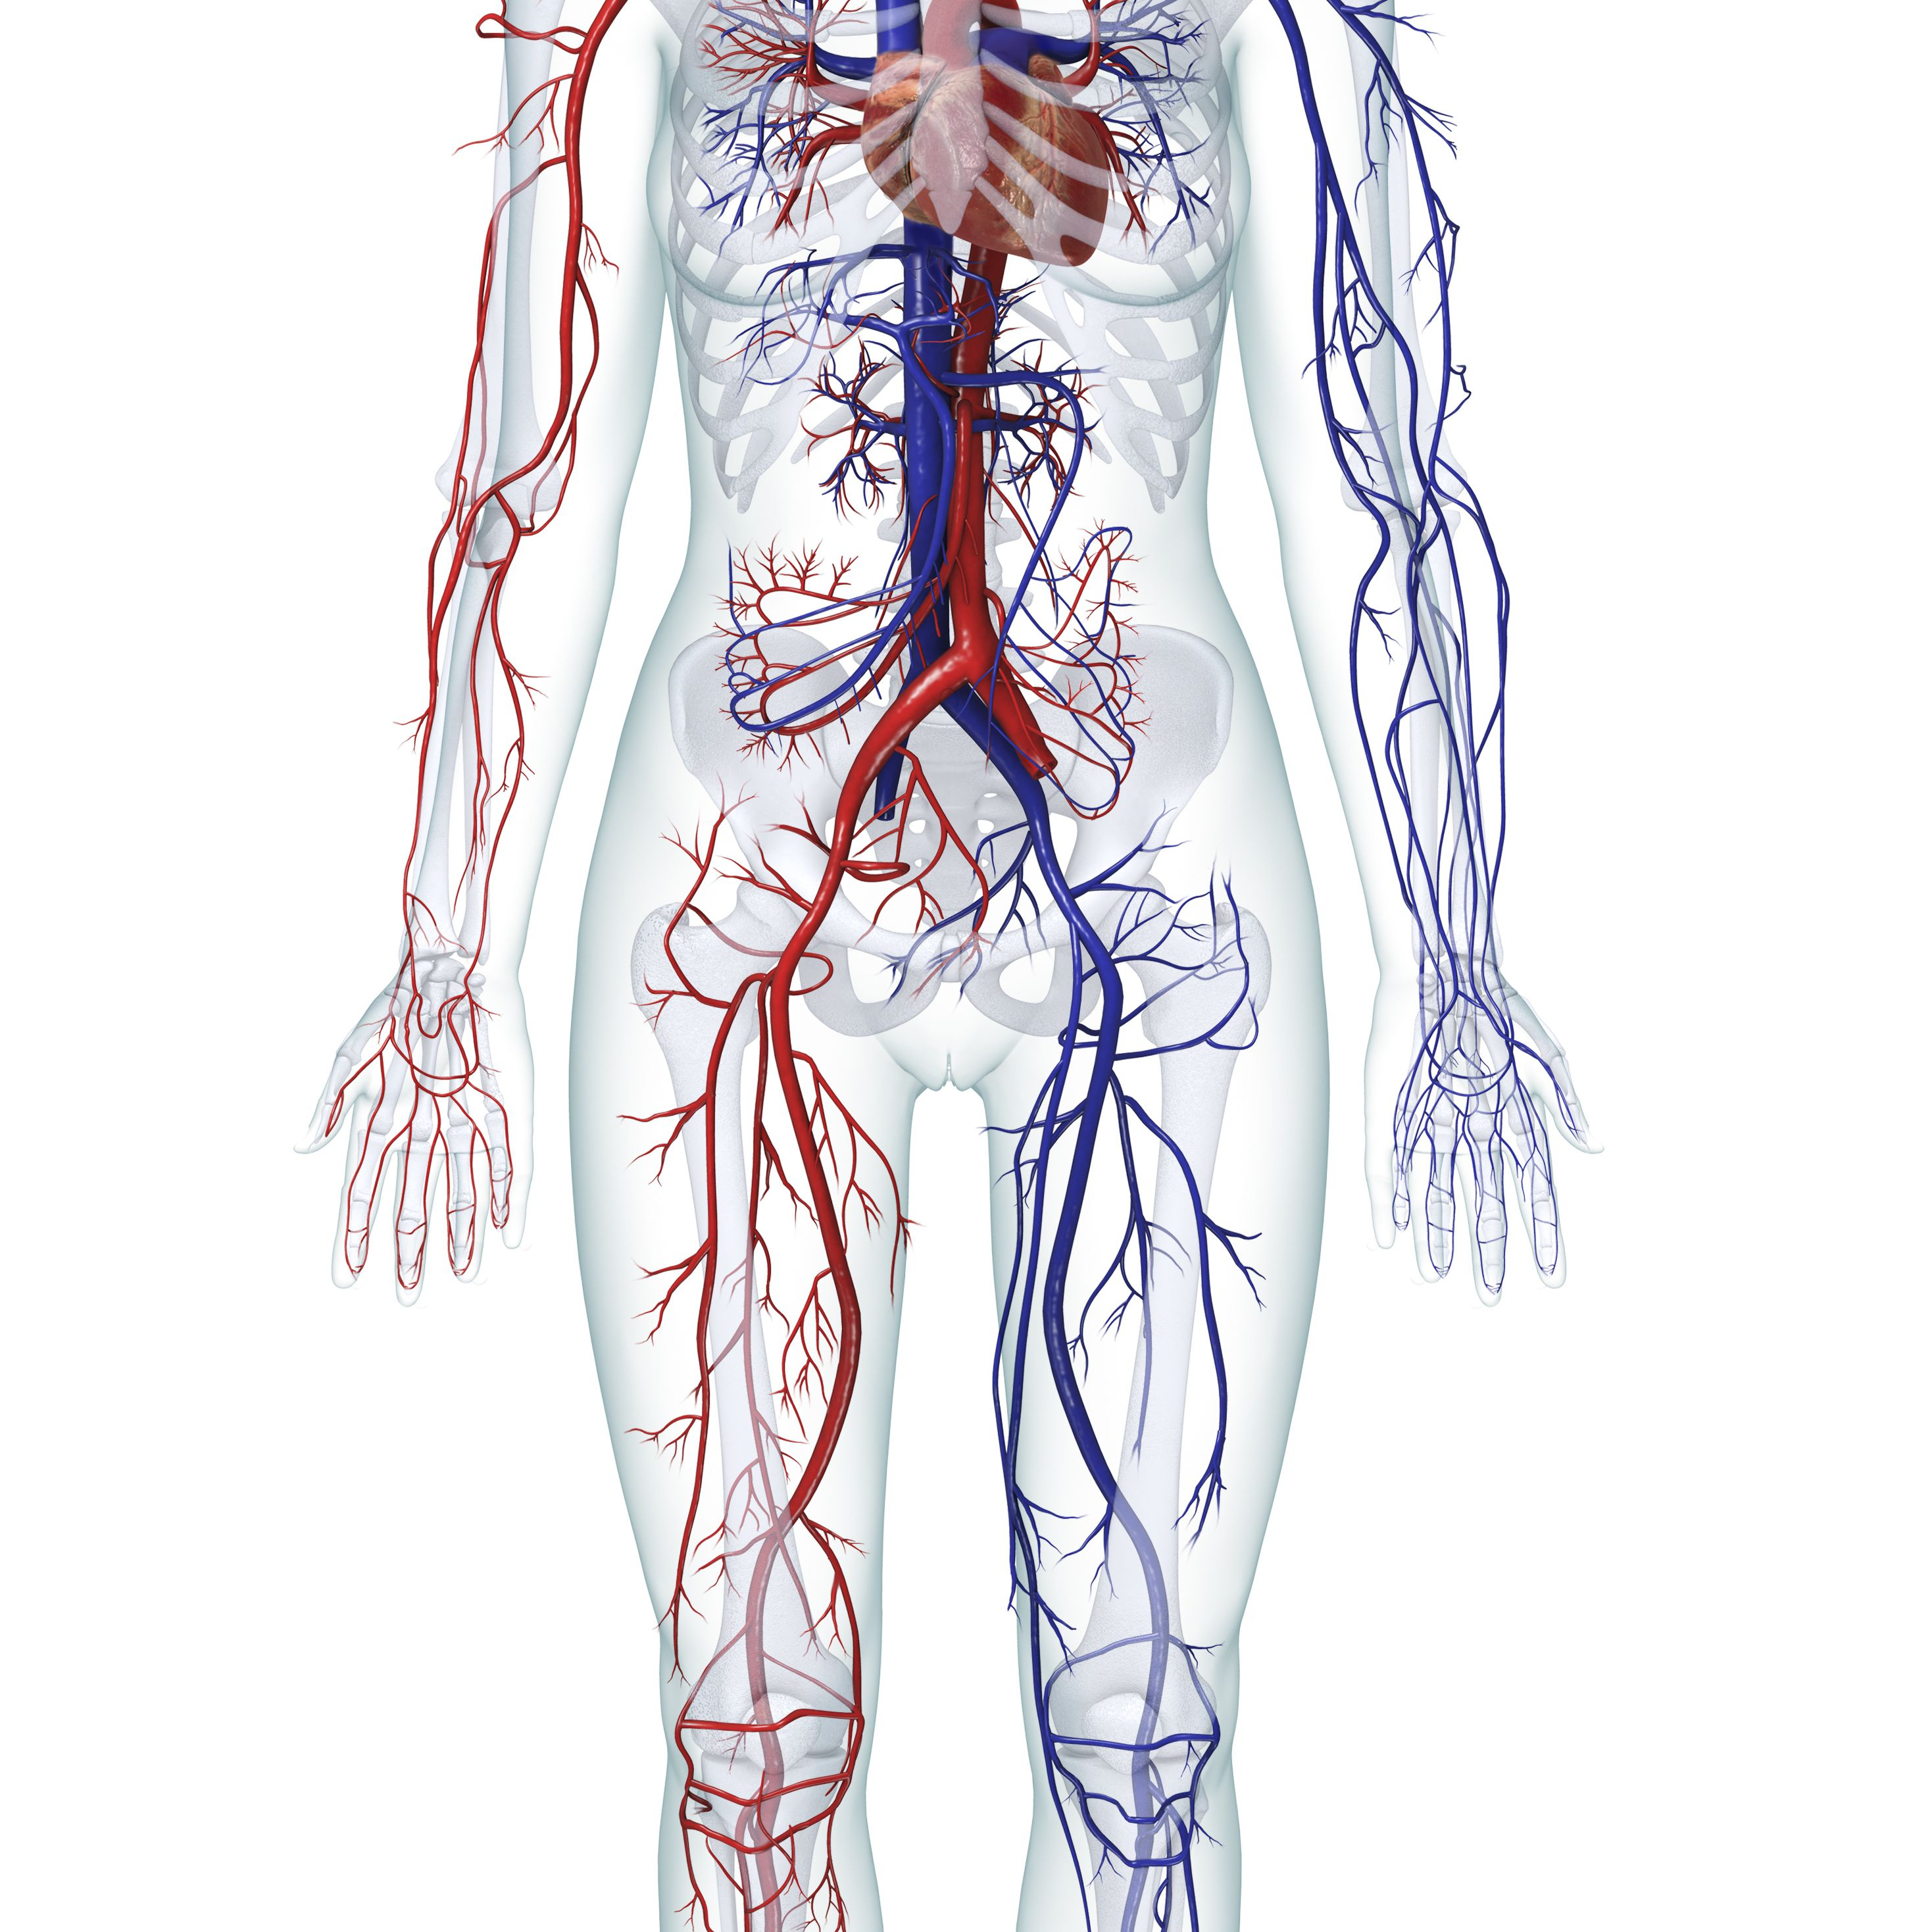 Diagram Of Human Body Organs Learn About The Organ Systems In The Human Body